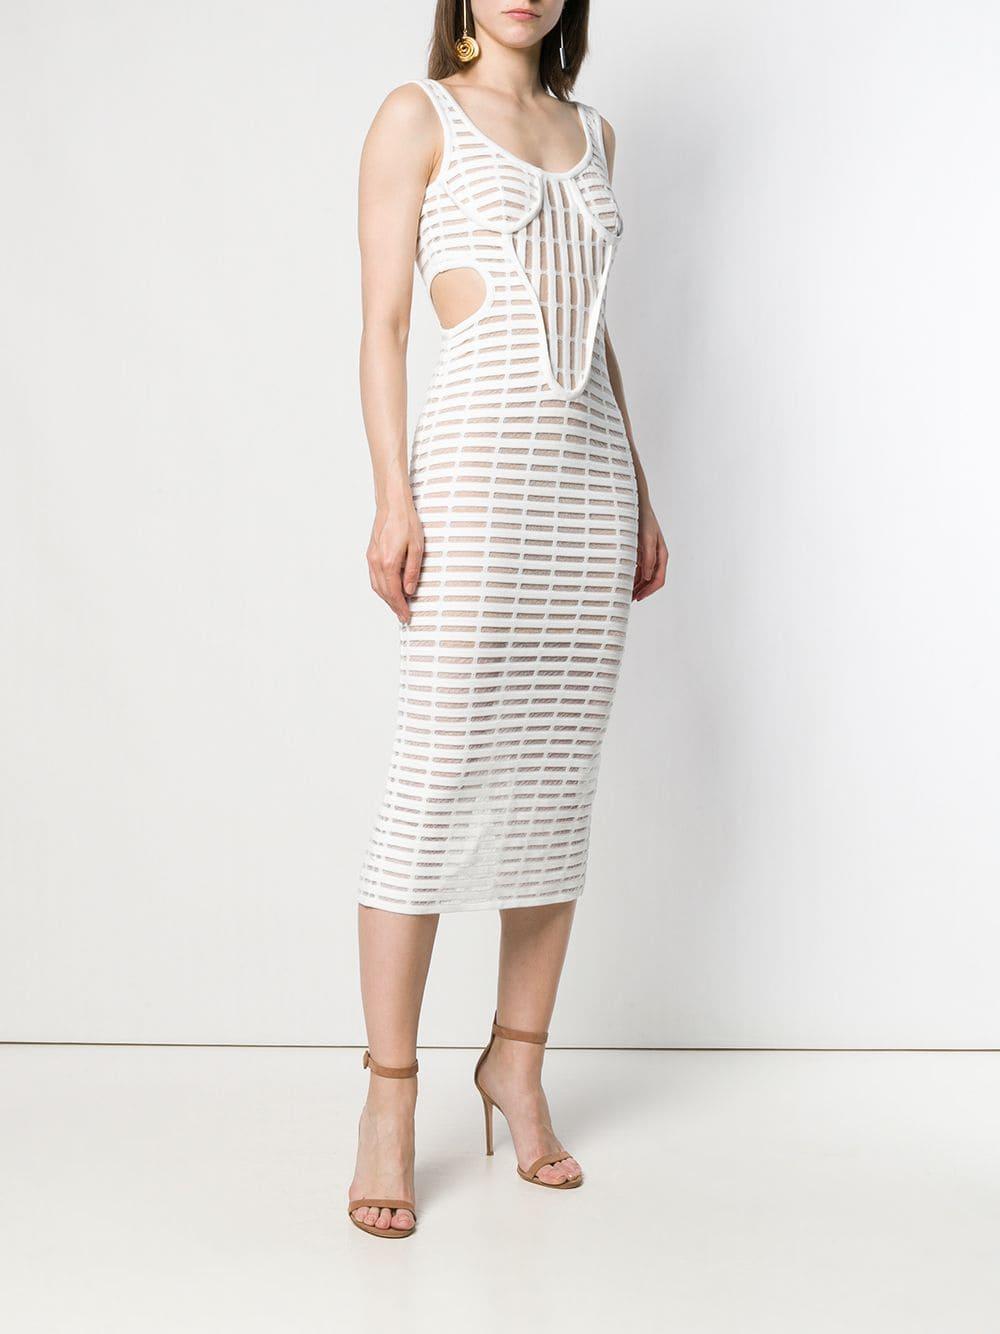 Genny Synthetic Structured Caged Dress in White - Lyst